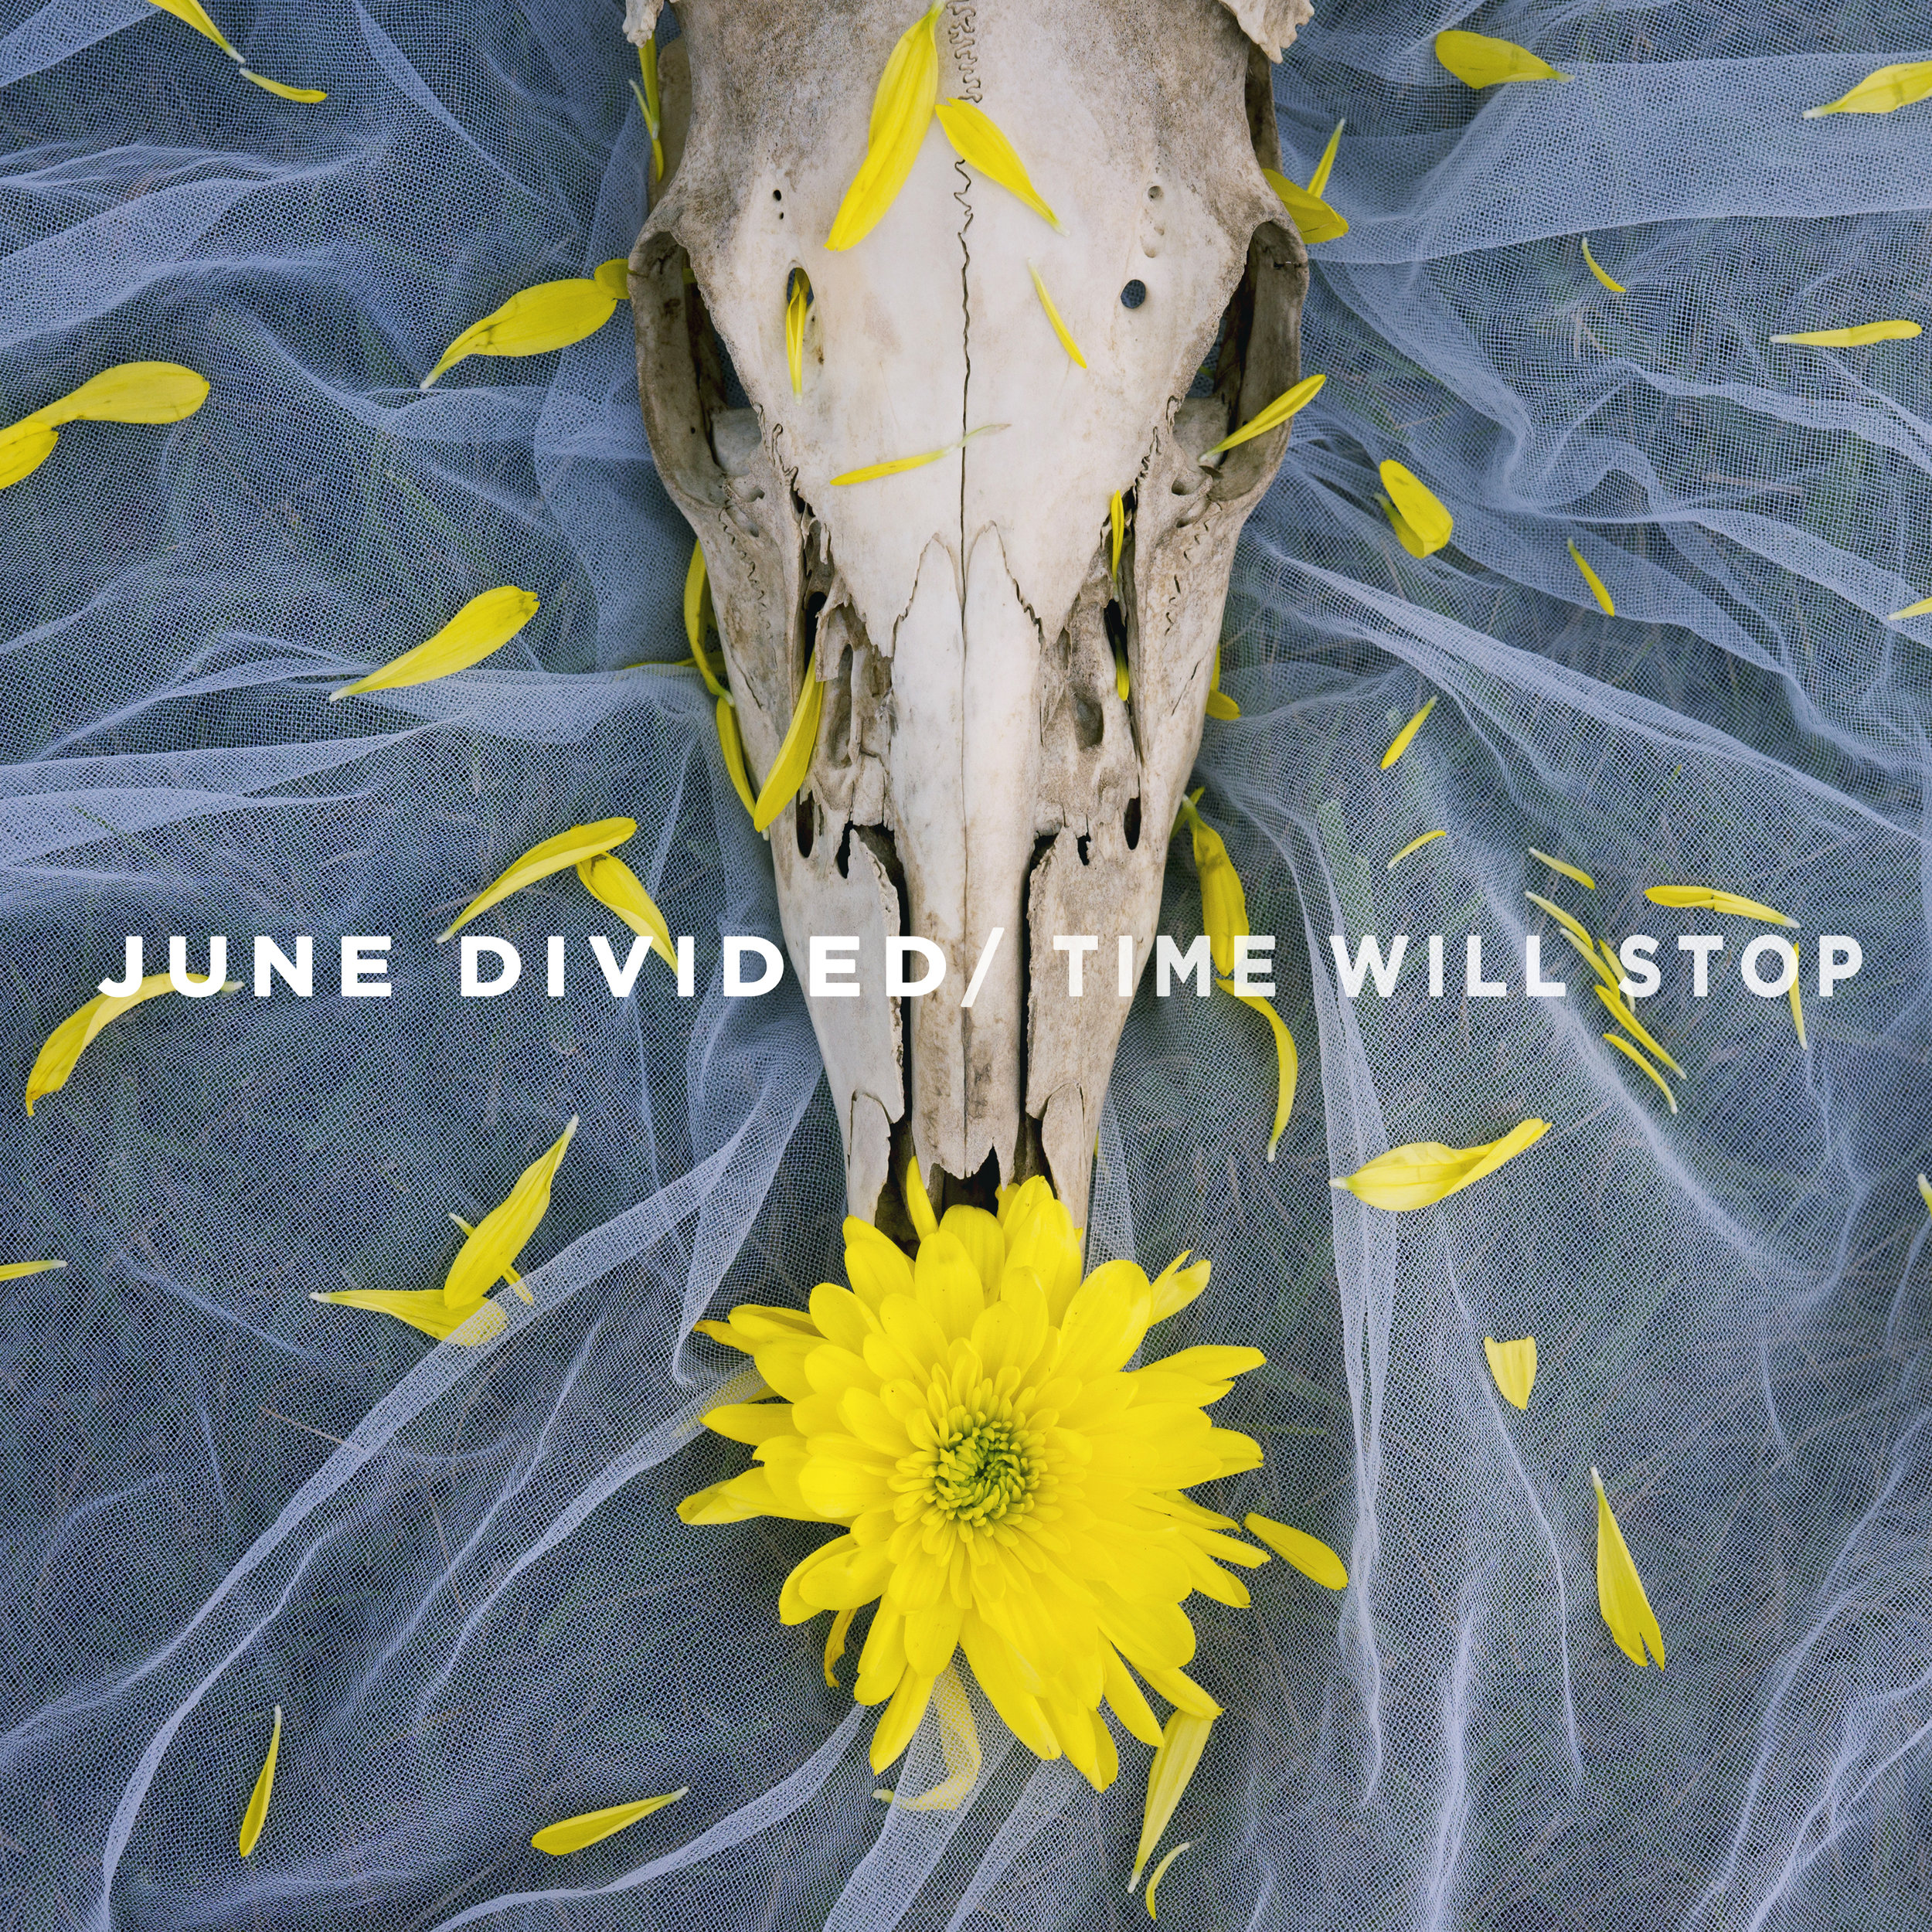 June Divided - Time Will Stop